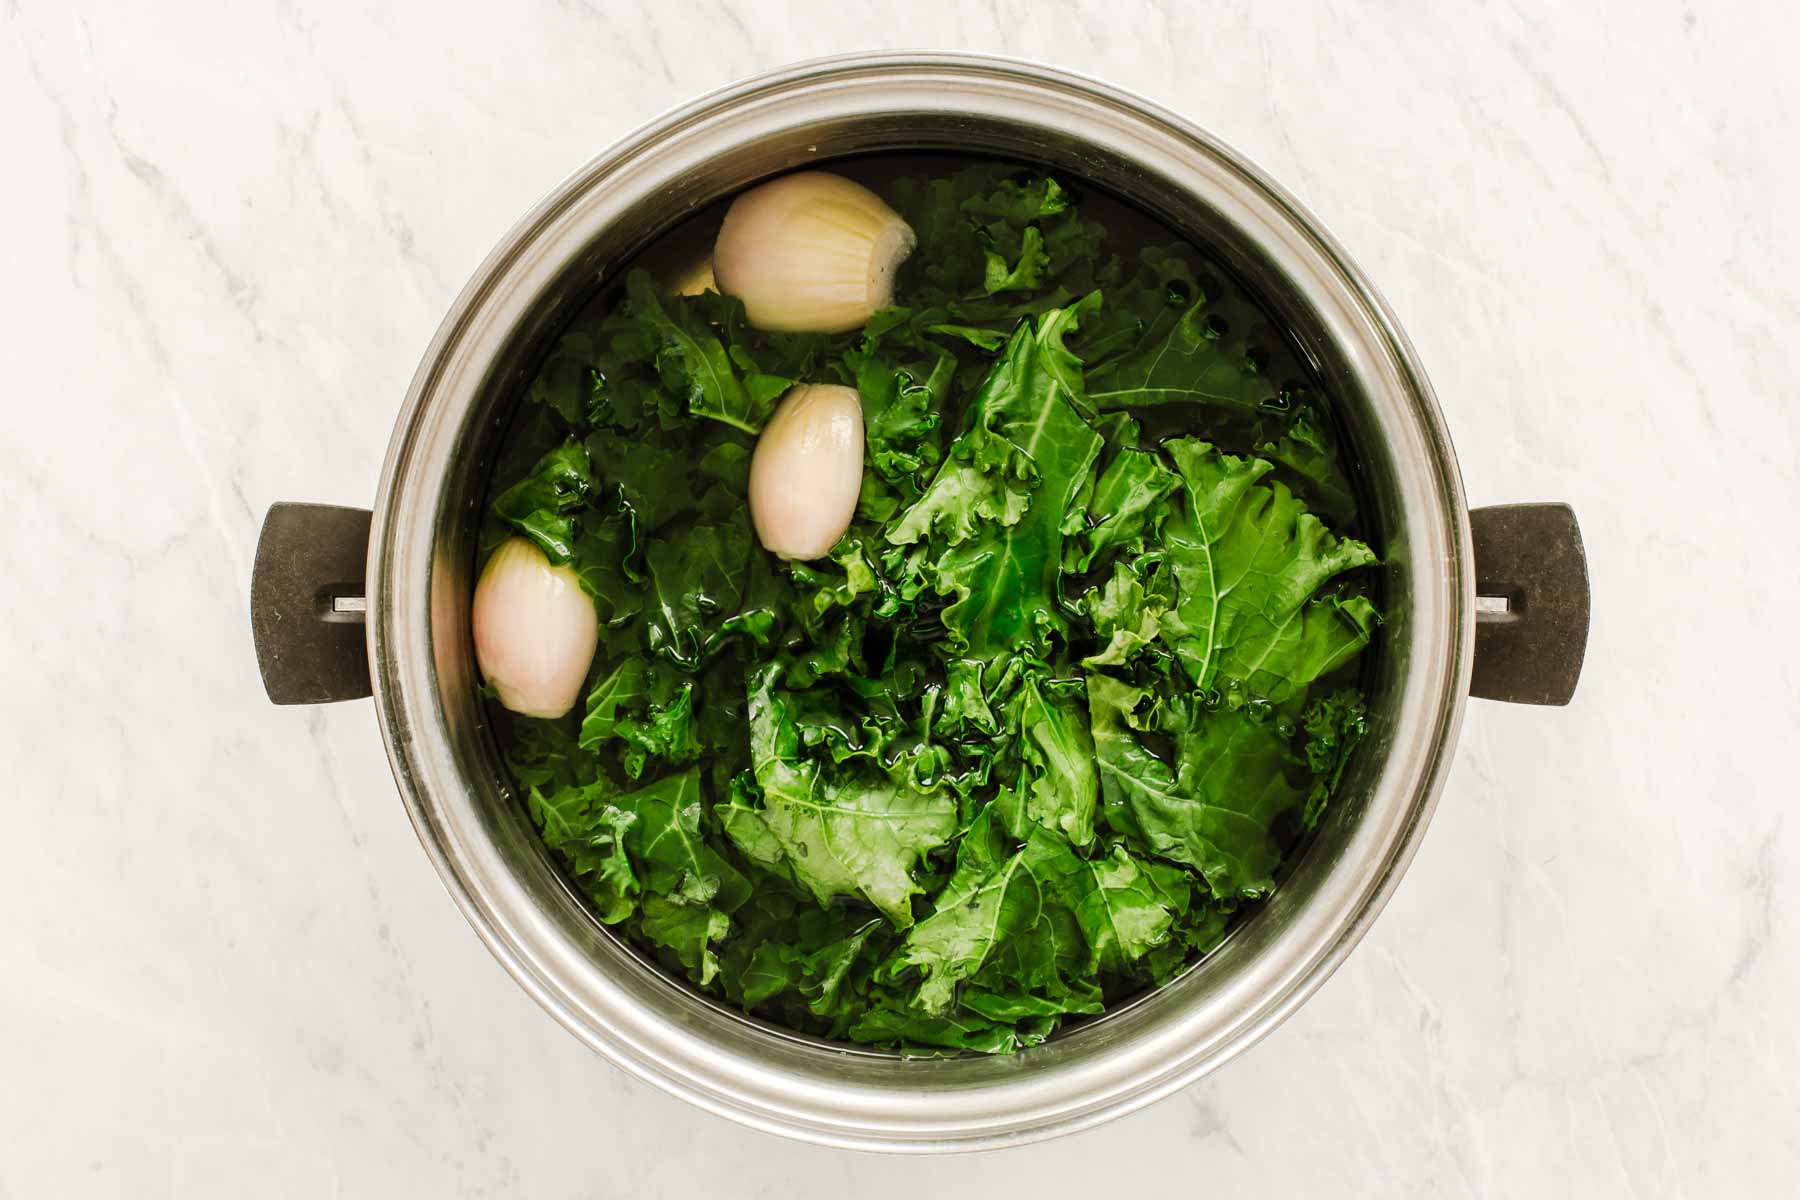 Silver pot with water that has garlic, shallots and kale.